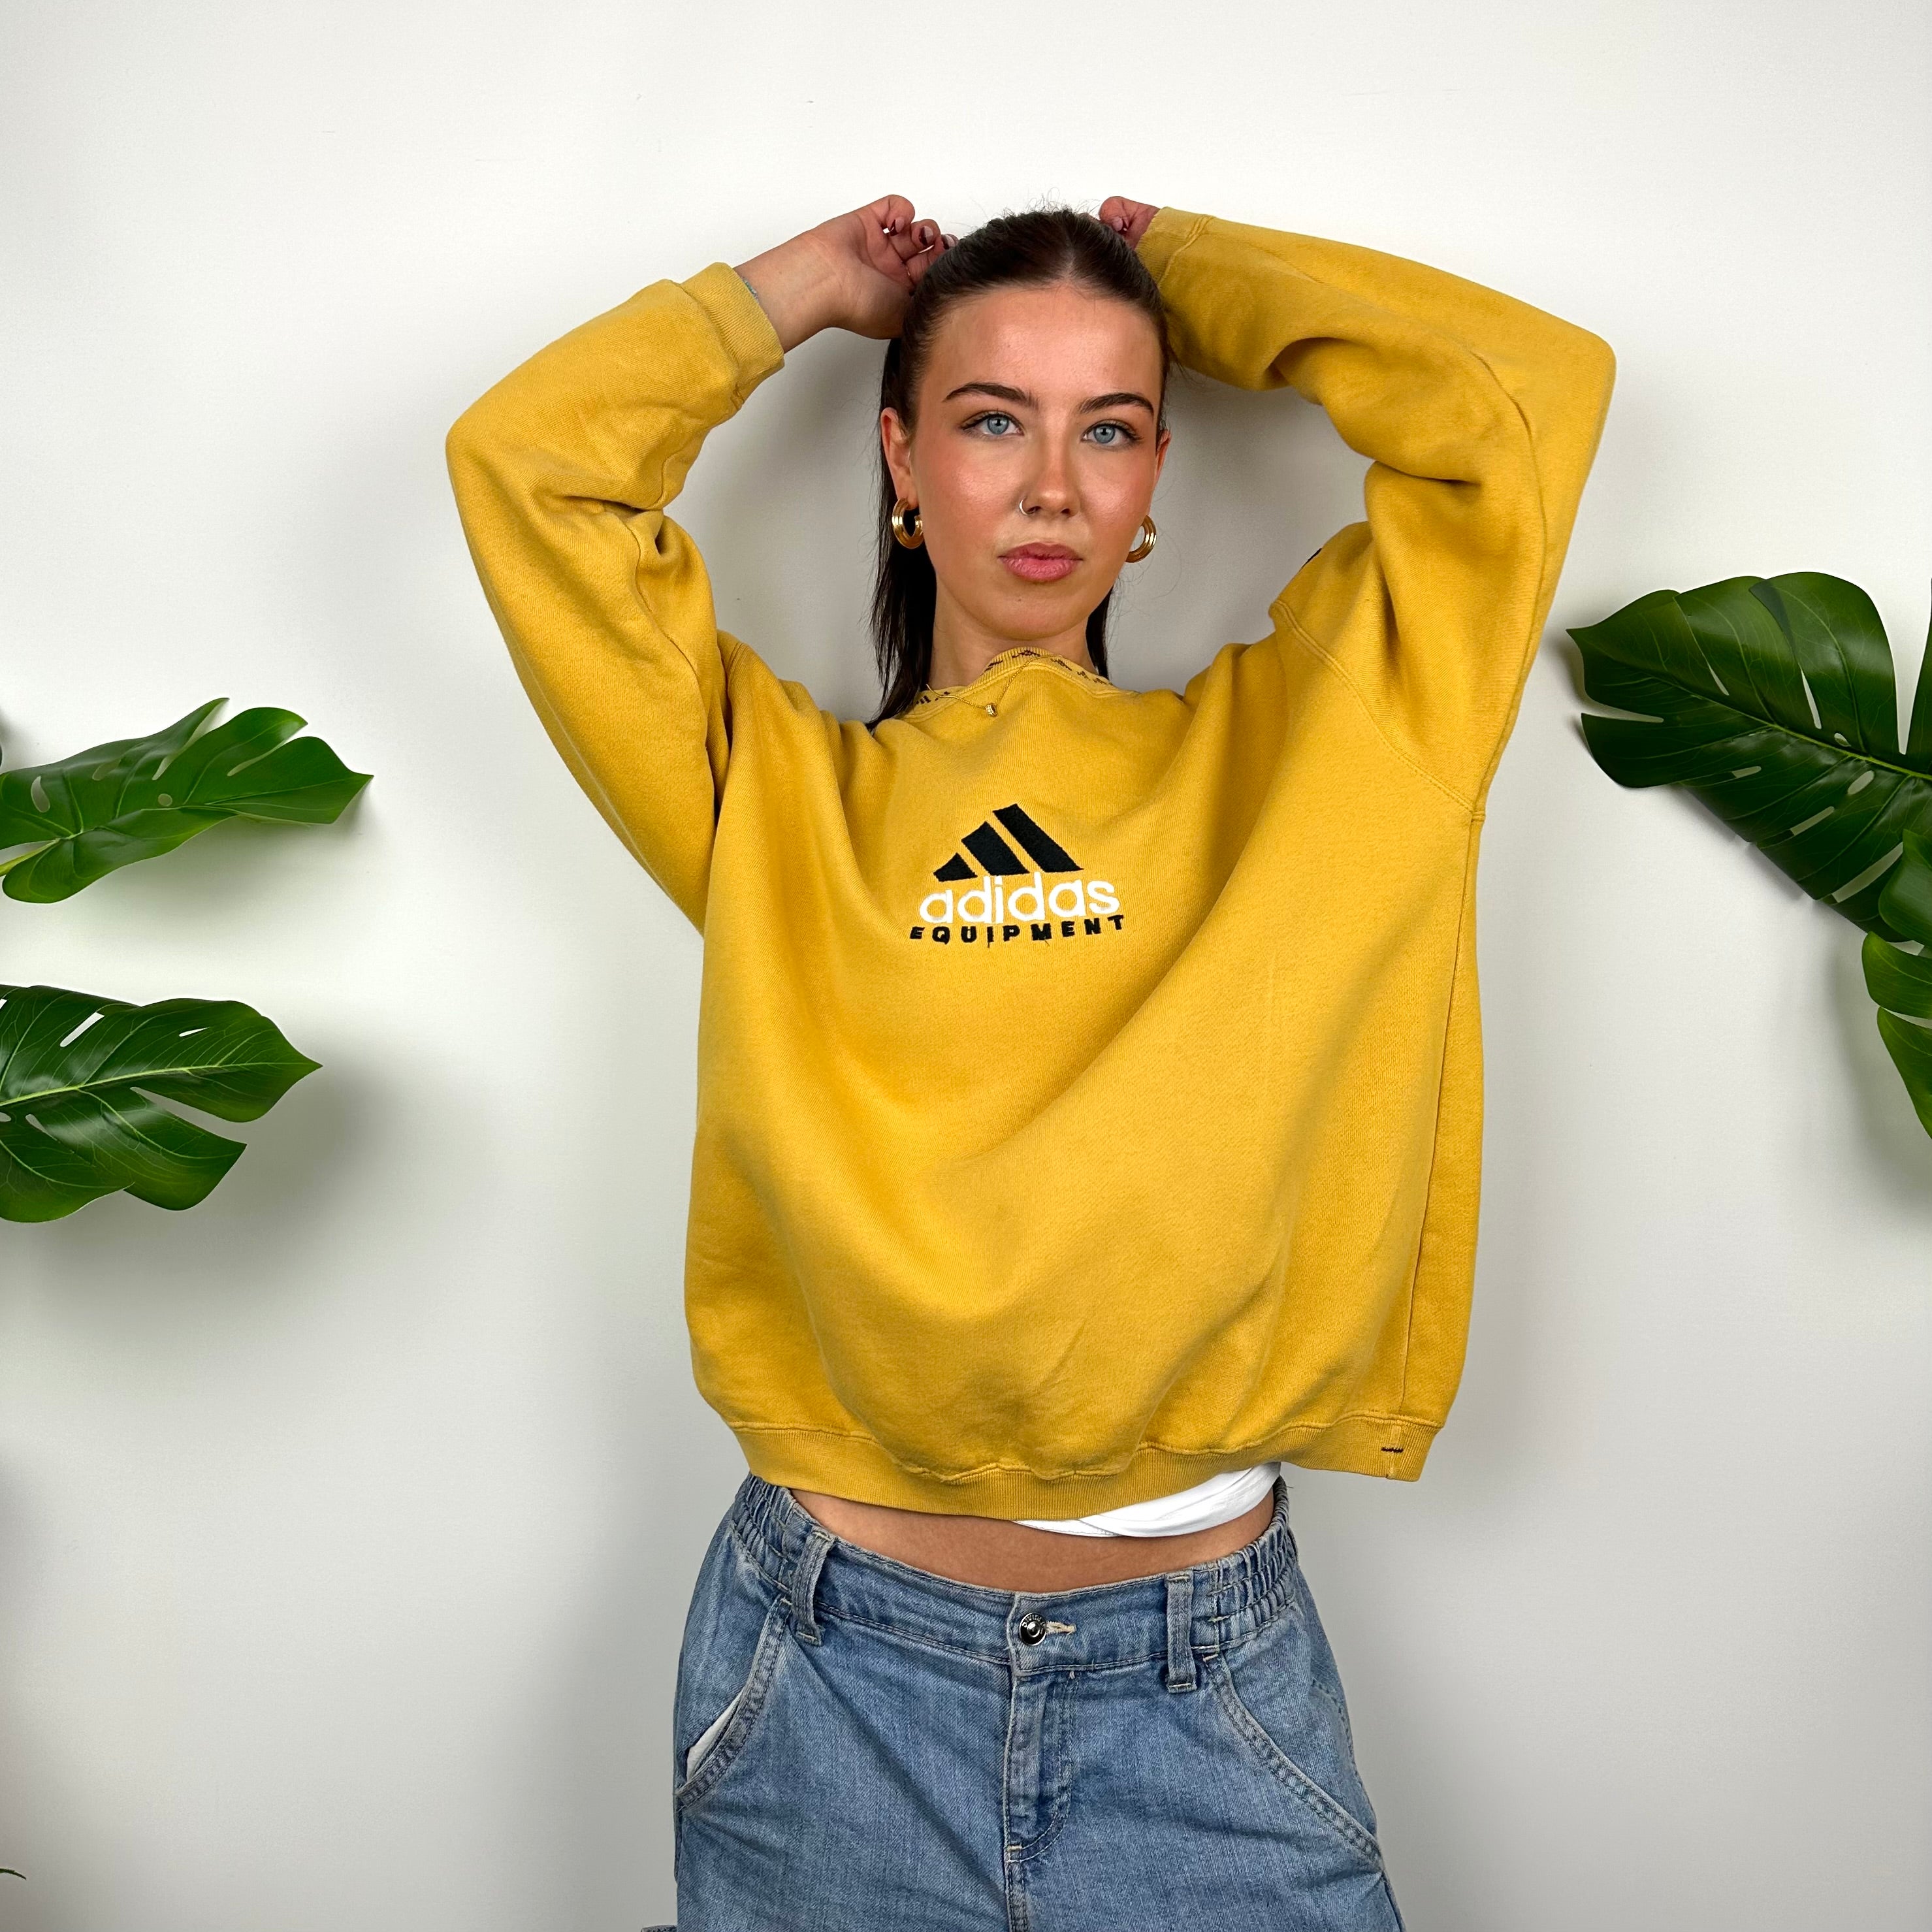 Adidas Equipment Yellow Embroidered Spell Out Sweatshirt (M)